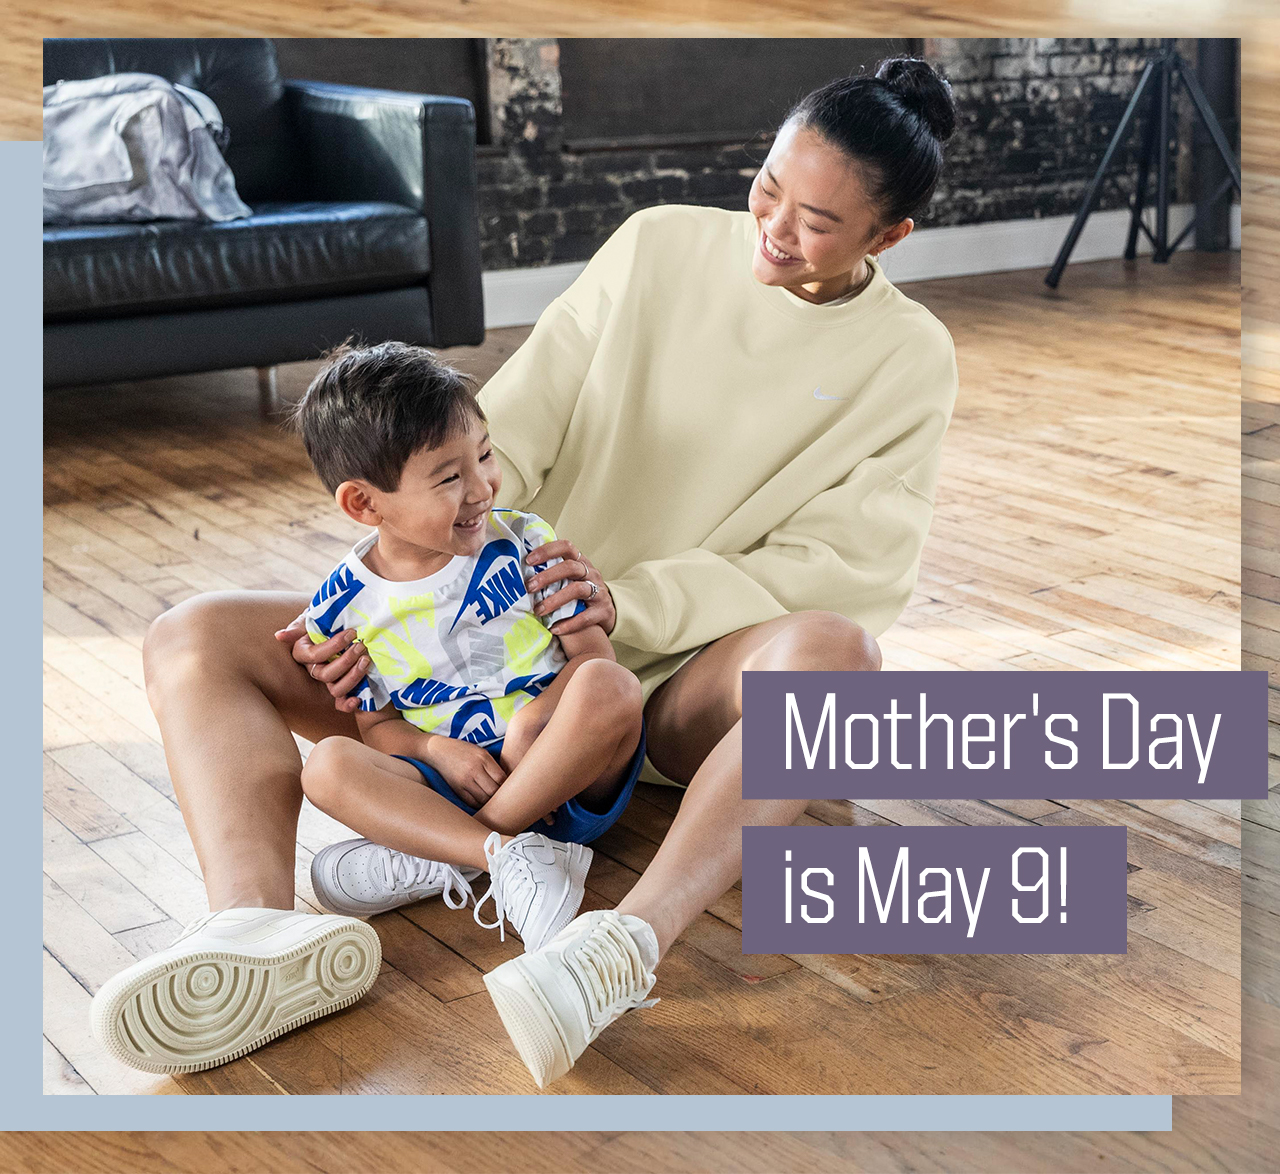 Mother's Day is May 9th!